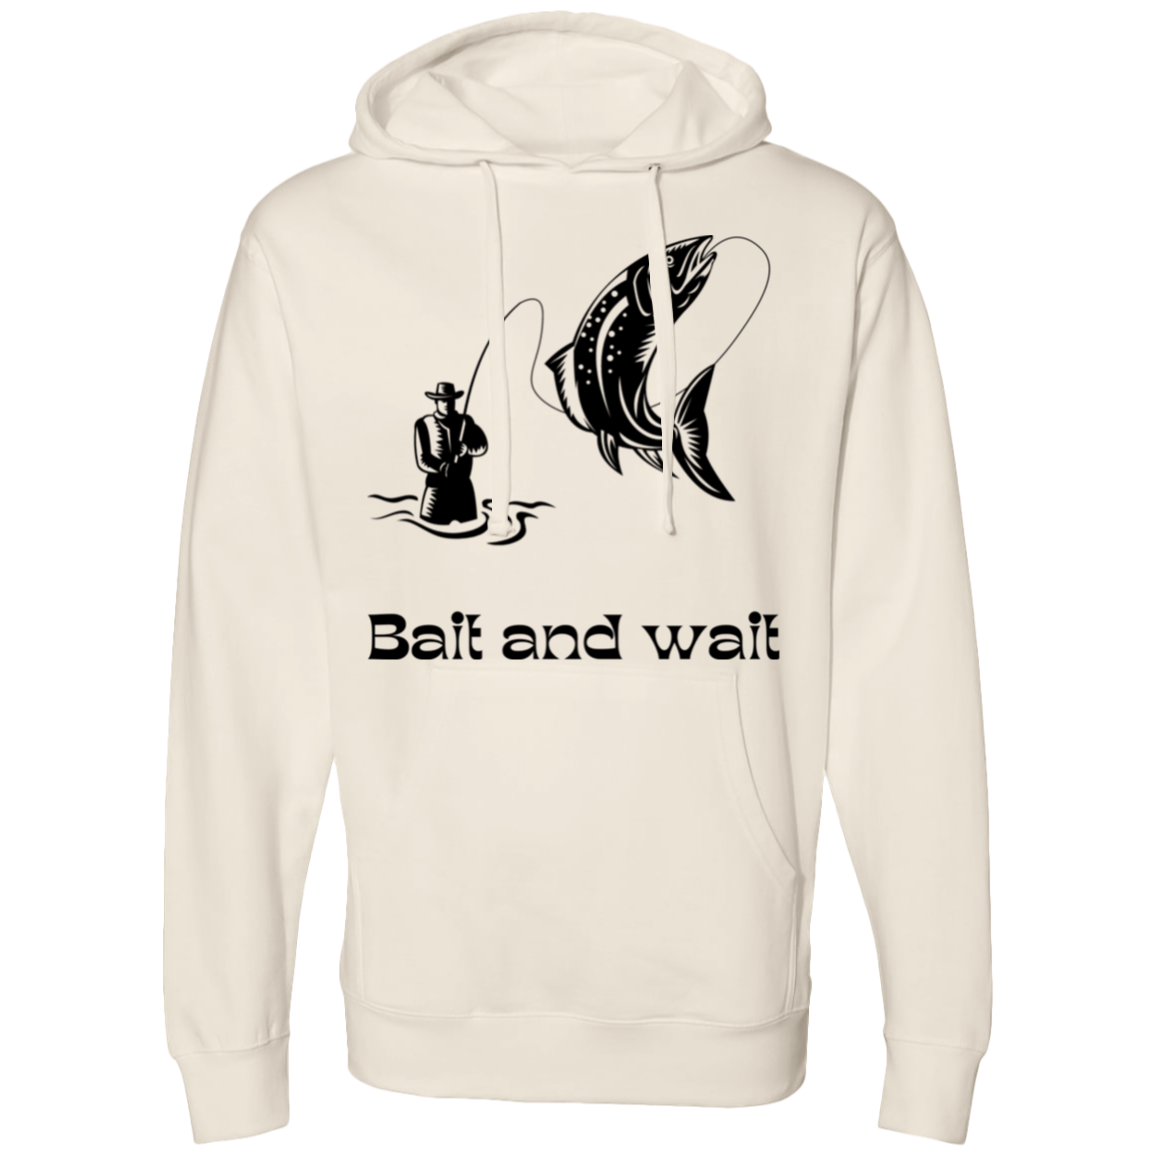 Bait and wait SS4500 Midweight Hooded Sweatshirt